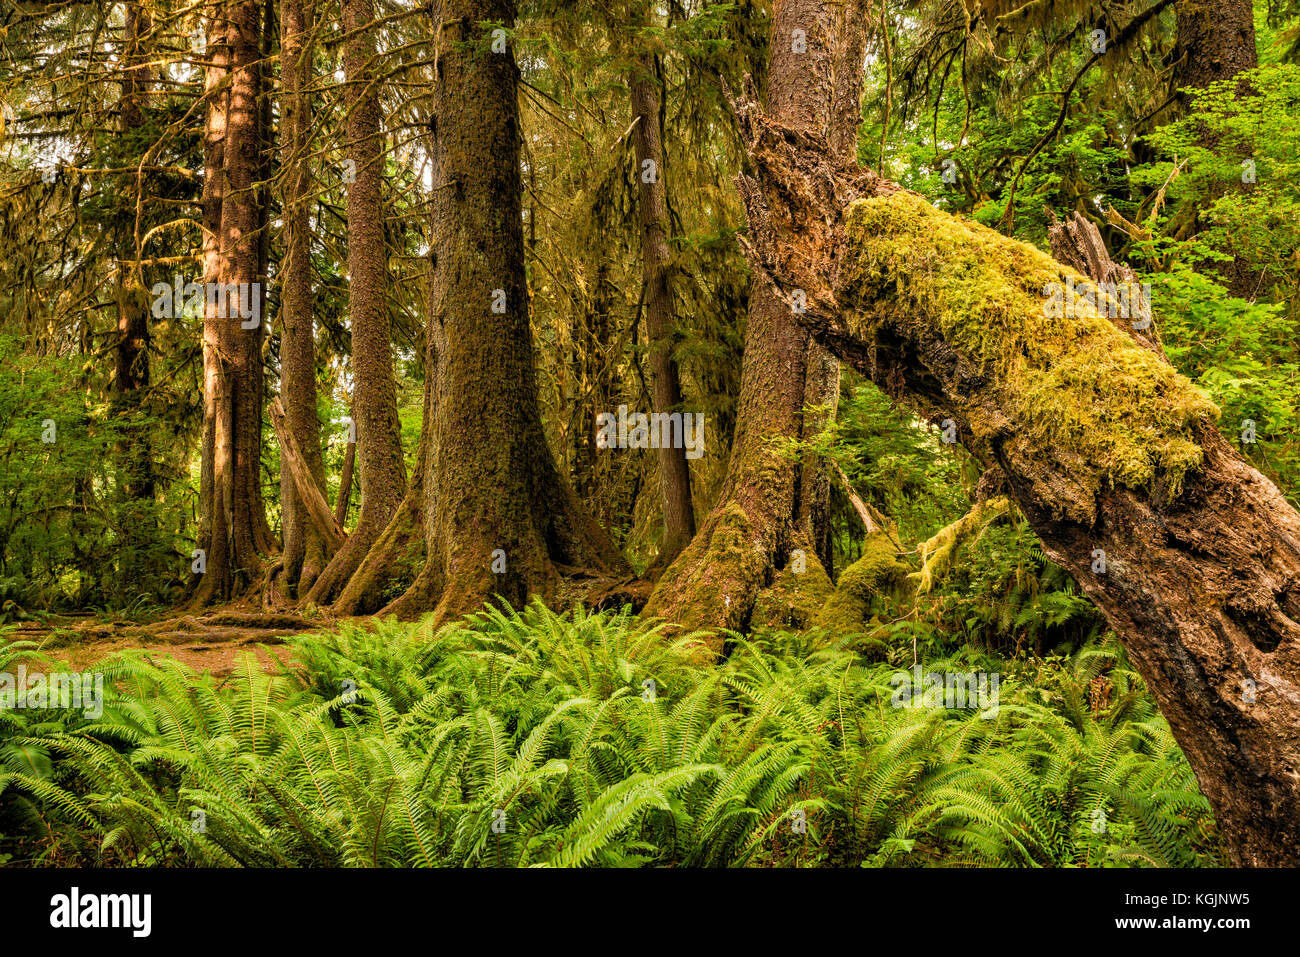 Colonnade of Sitka spruce, western hemlock growing in straight line over remains of its nurse log, Hoh Rain Forest, Olympic Nat Park, Washington, USA Stock Photo